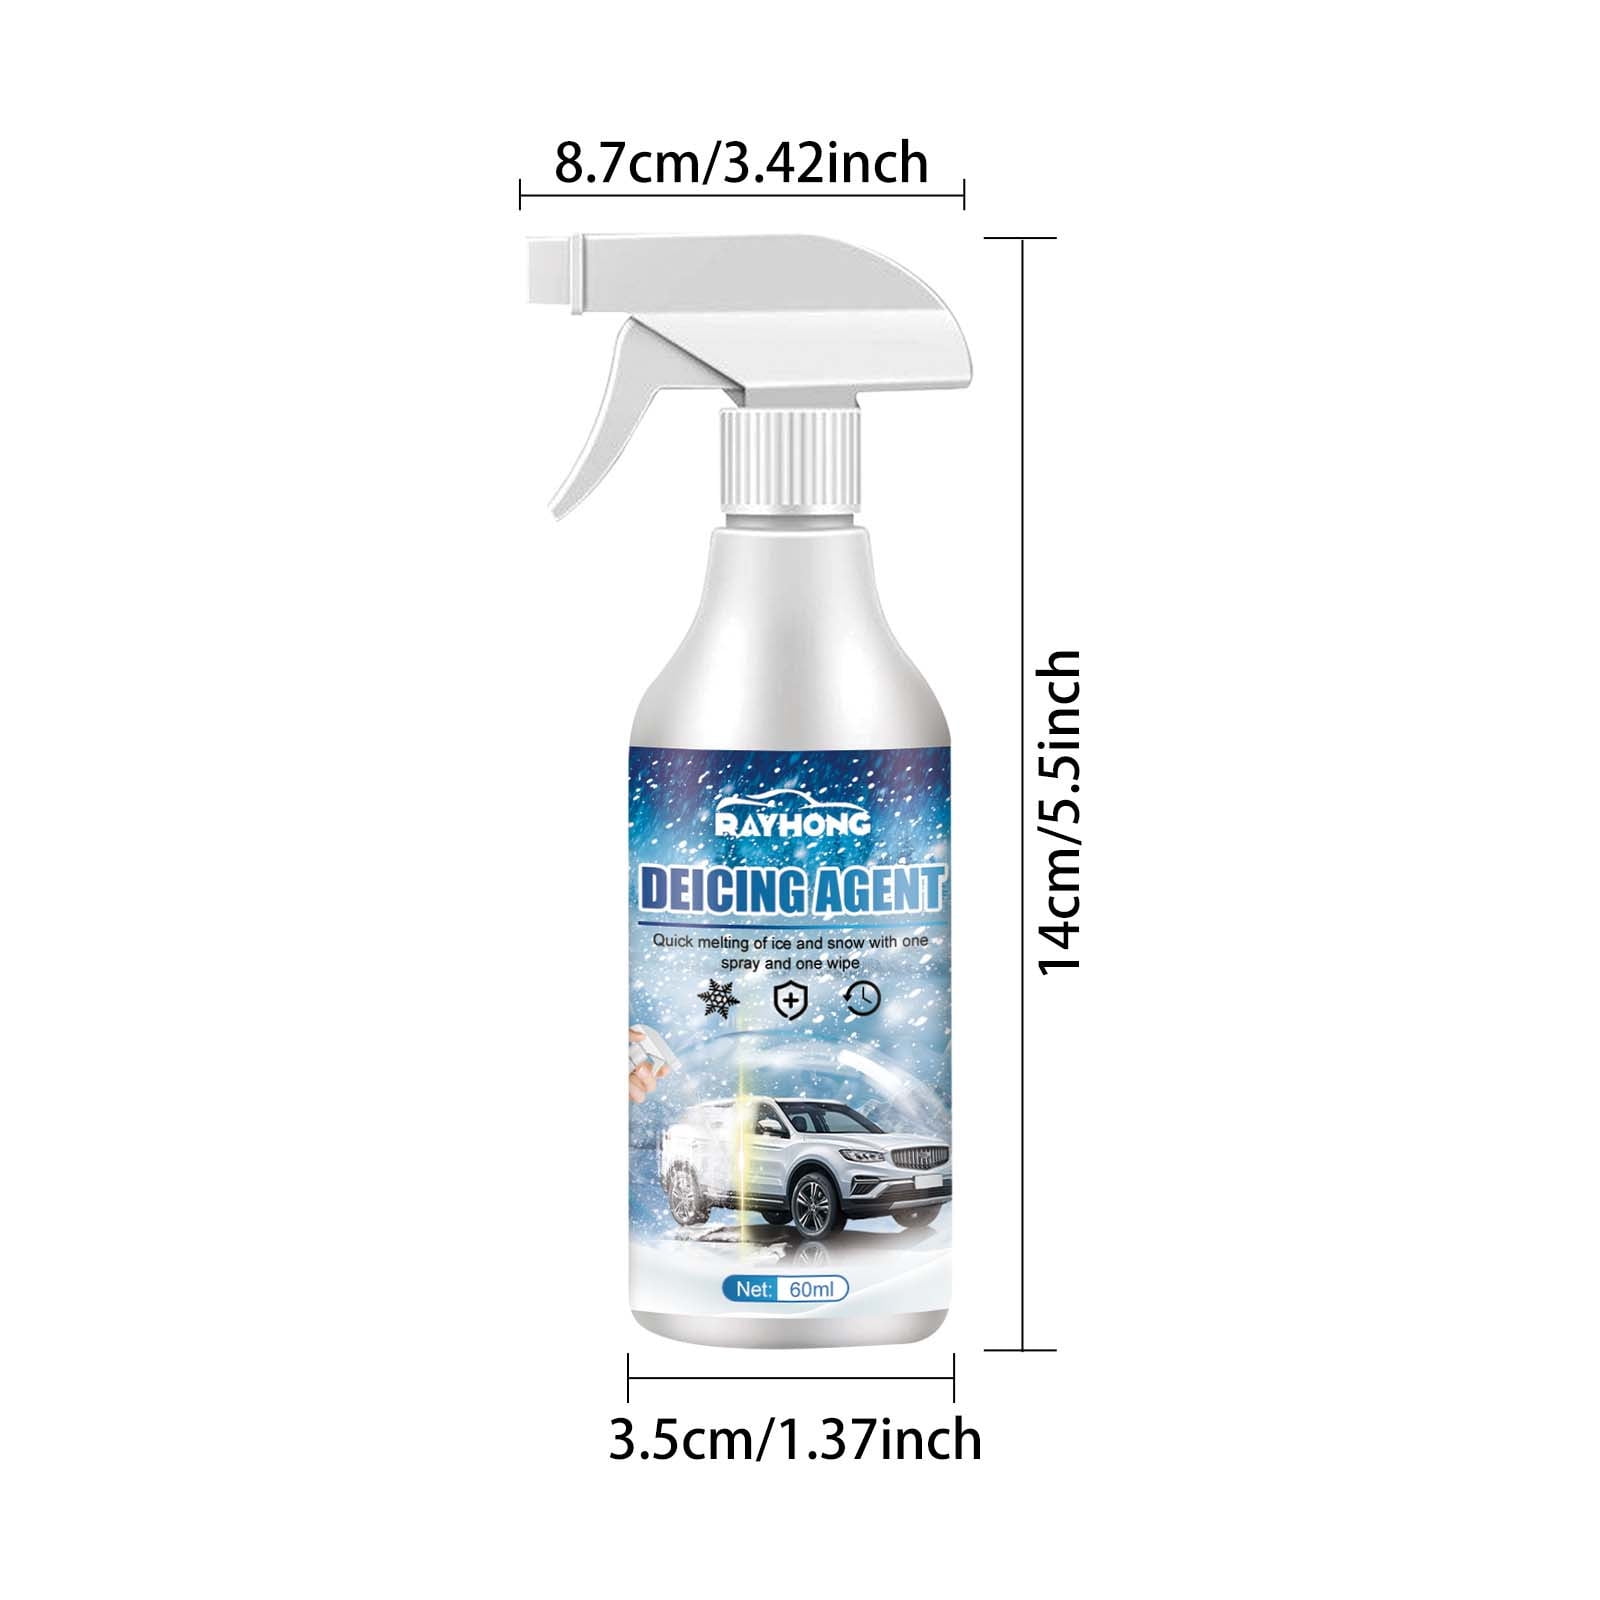  Auto Windshield Deicing Spray, De-Icer for Car Windshield,  Windshield Spray De-Icer for Car Windshield Windows Wipers and Mirrors,  Fast Ice Melting Anti Frost，60ml (2PCS) : Automotive